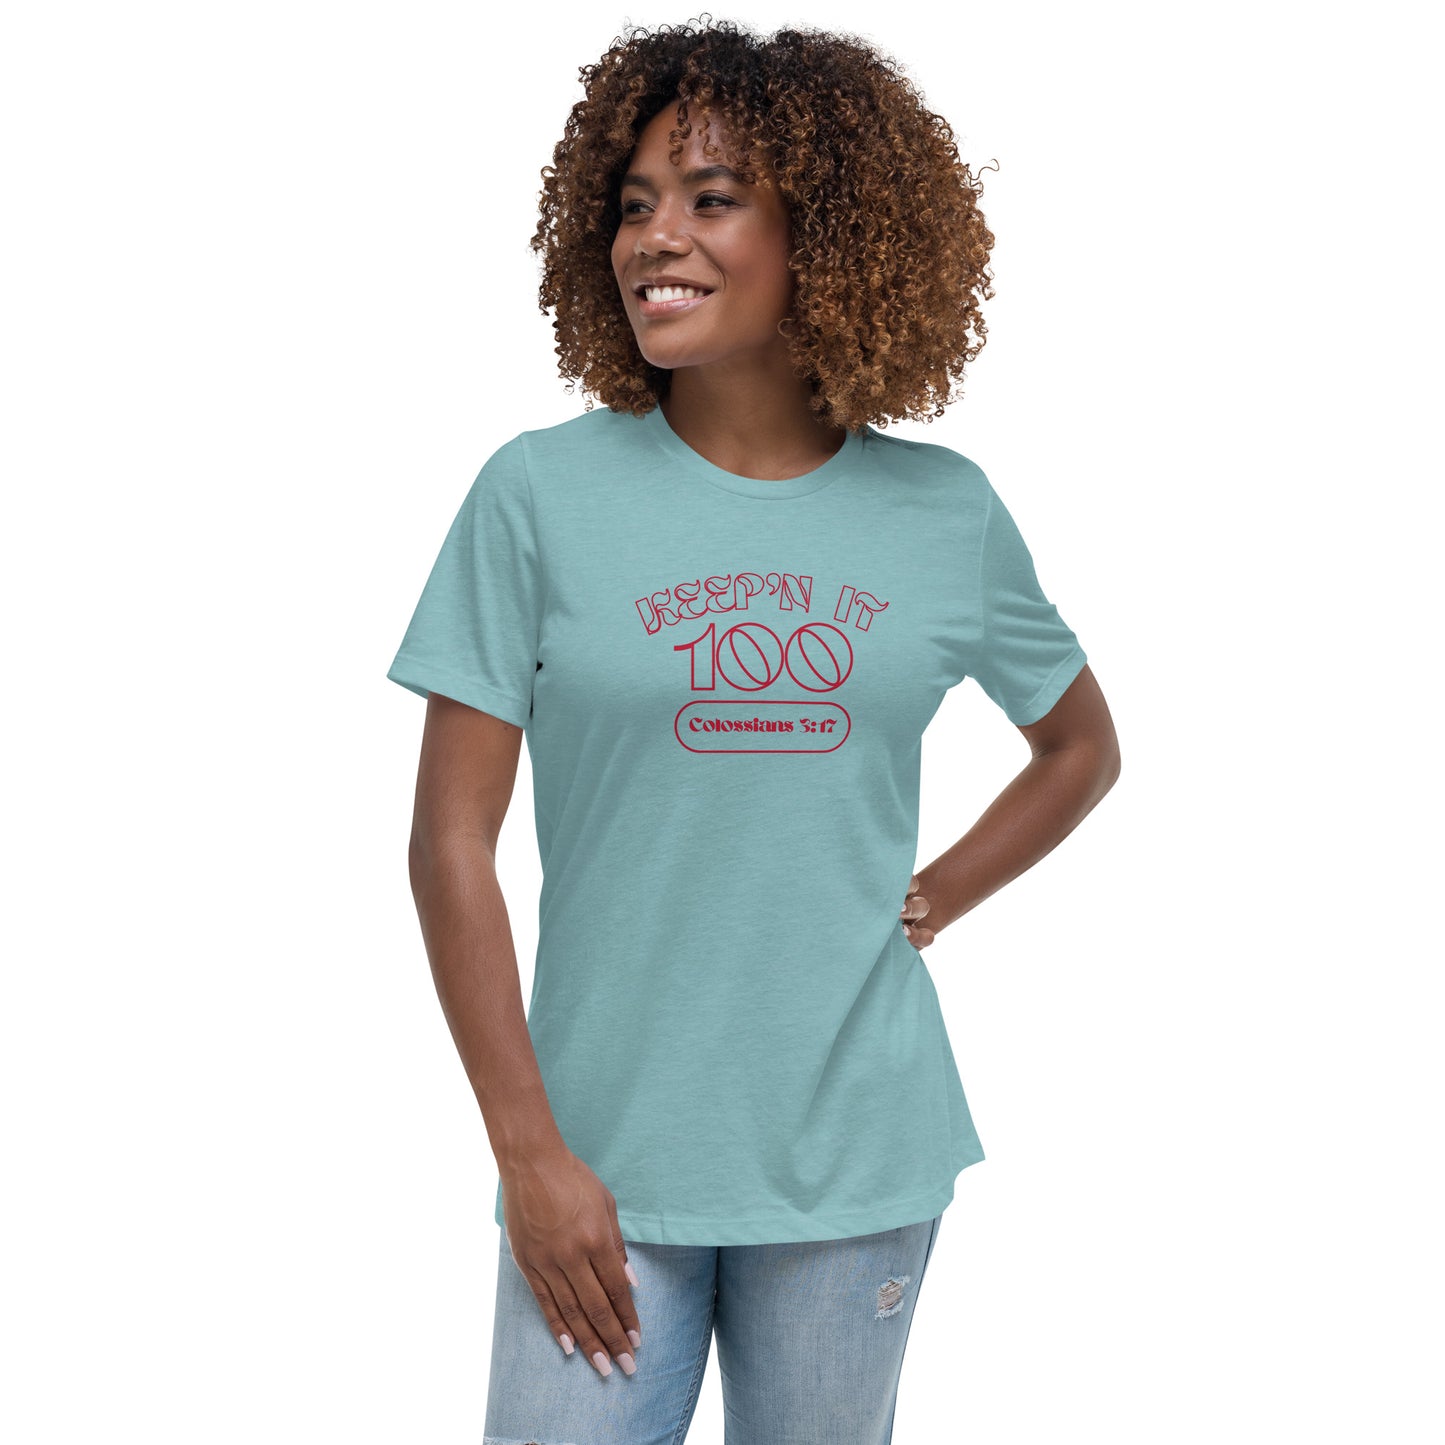 KEEP'N IT 100 Colossians 3:17 Women's Relaxed T-Shirt